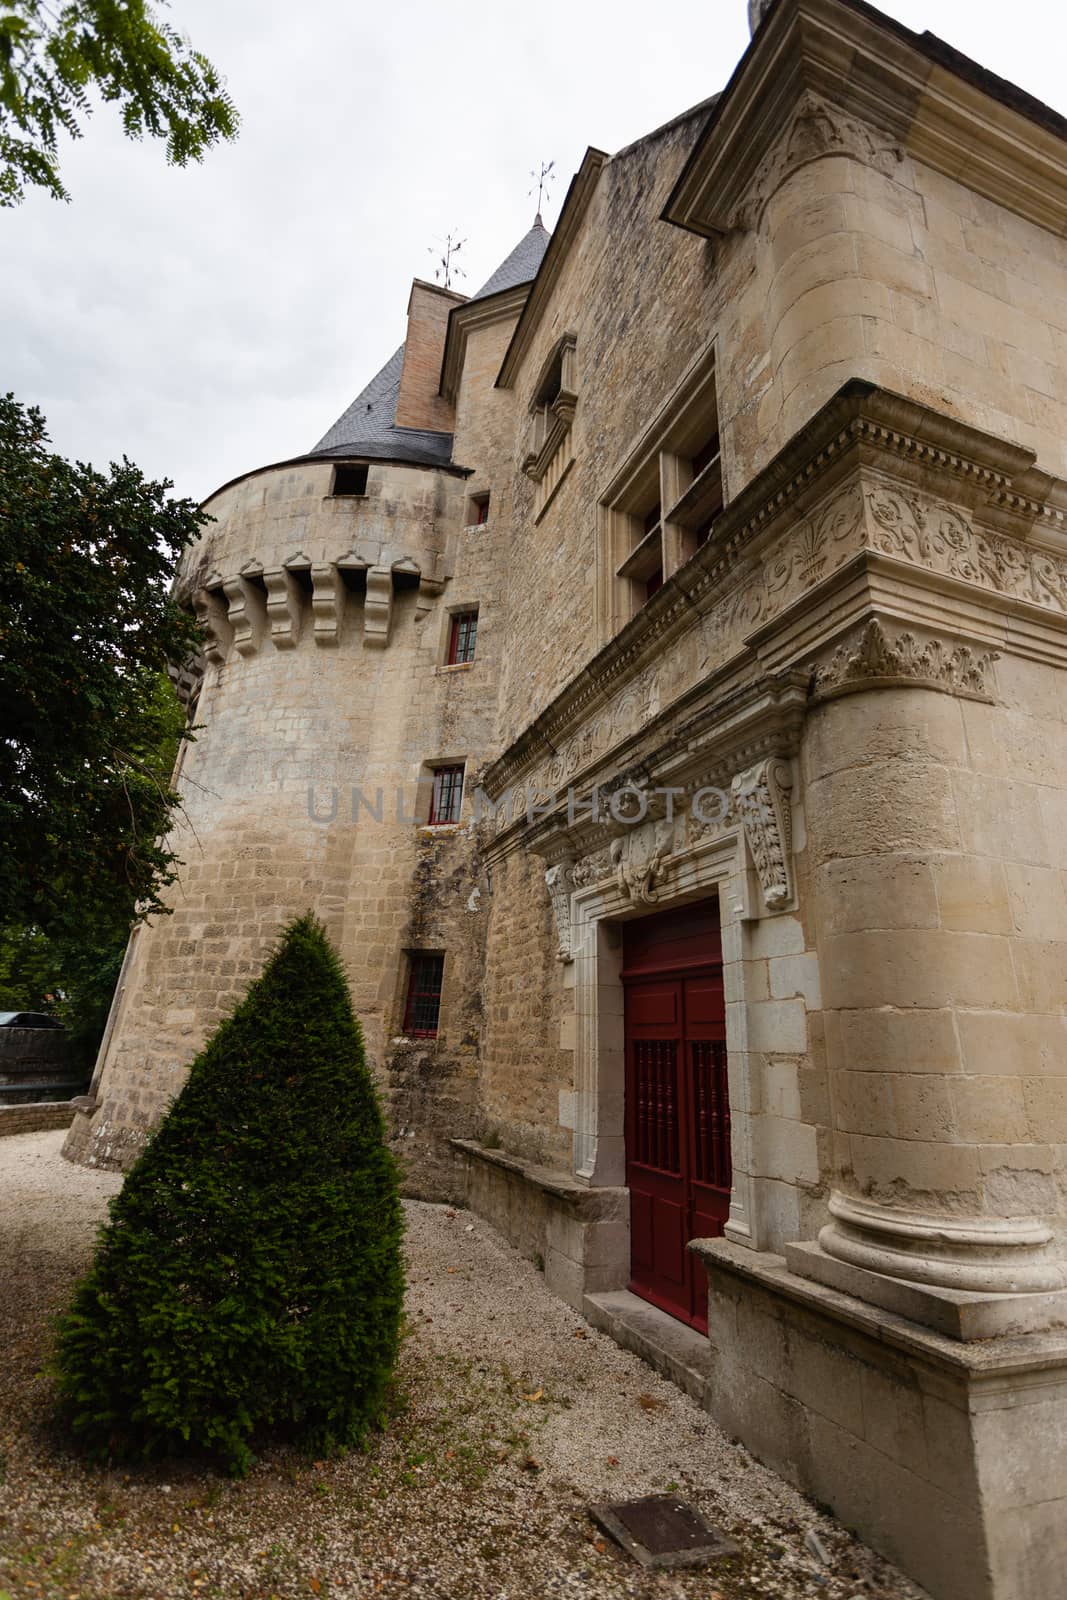 Lateral facade of Dampierre-sur-Boutonne castle in charente maritime , France